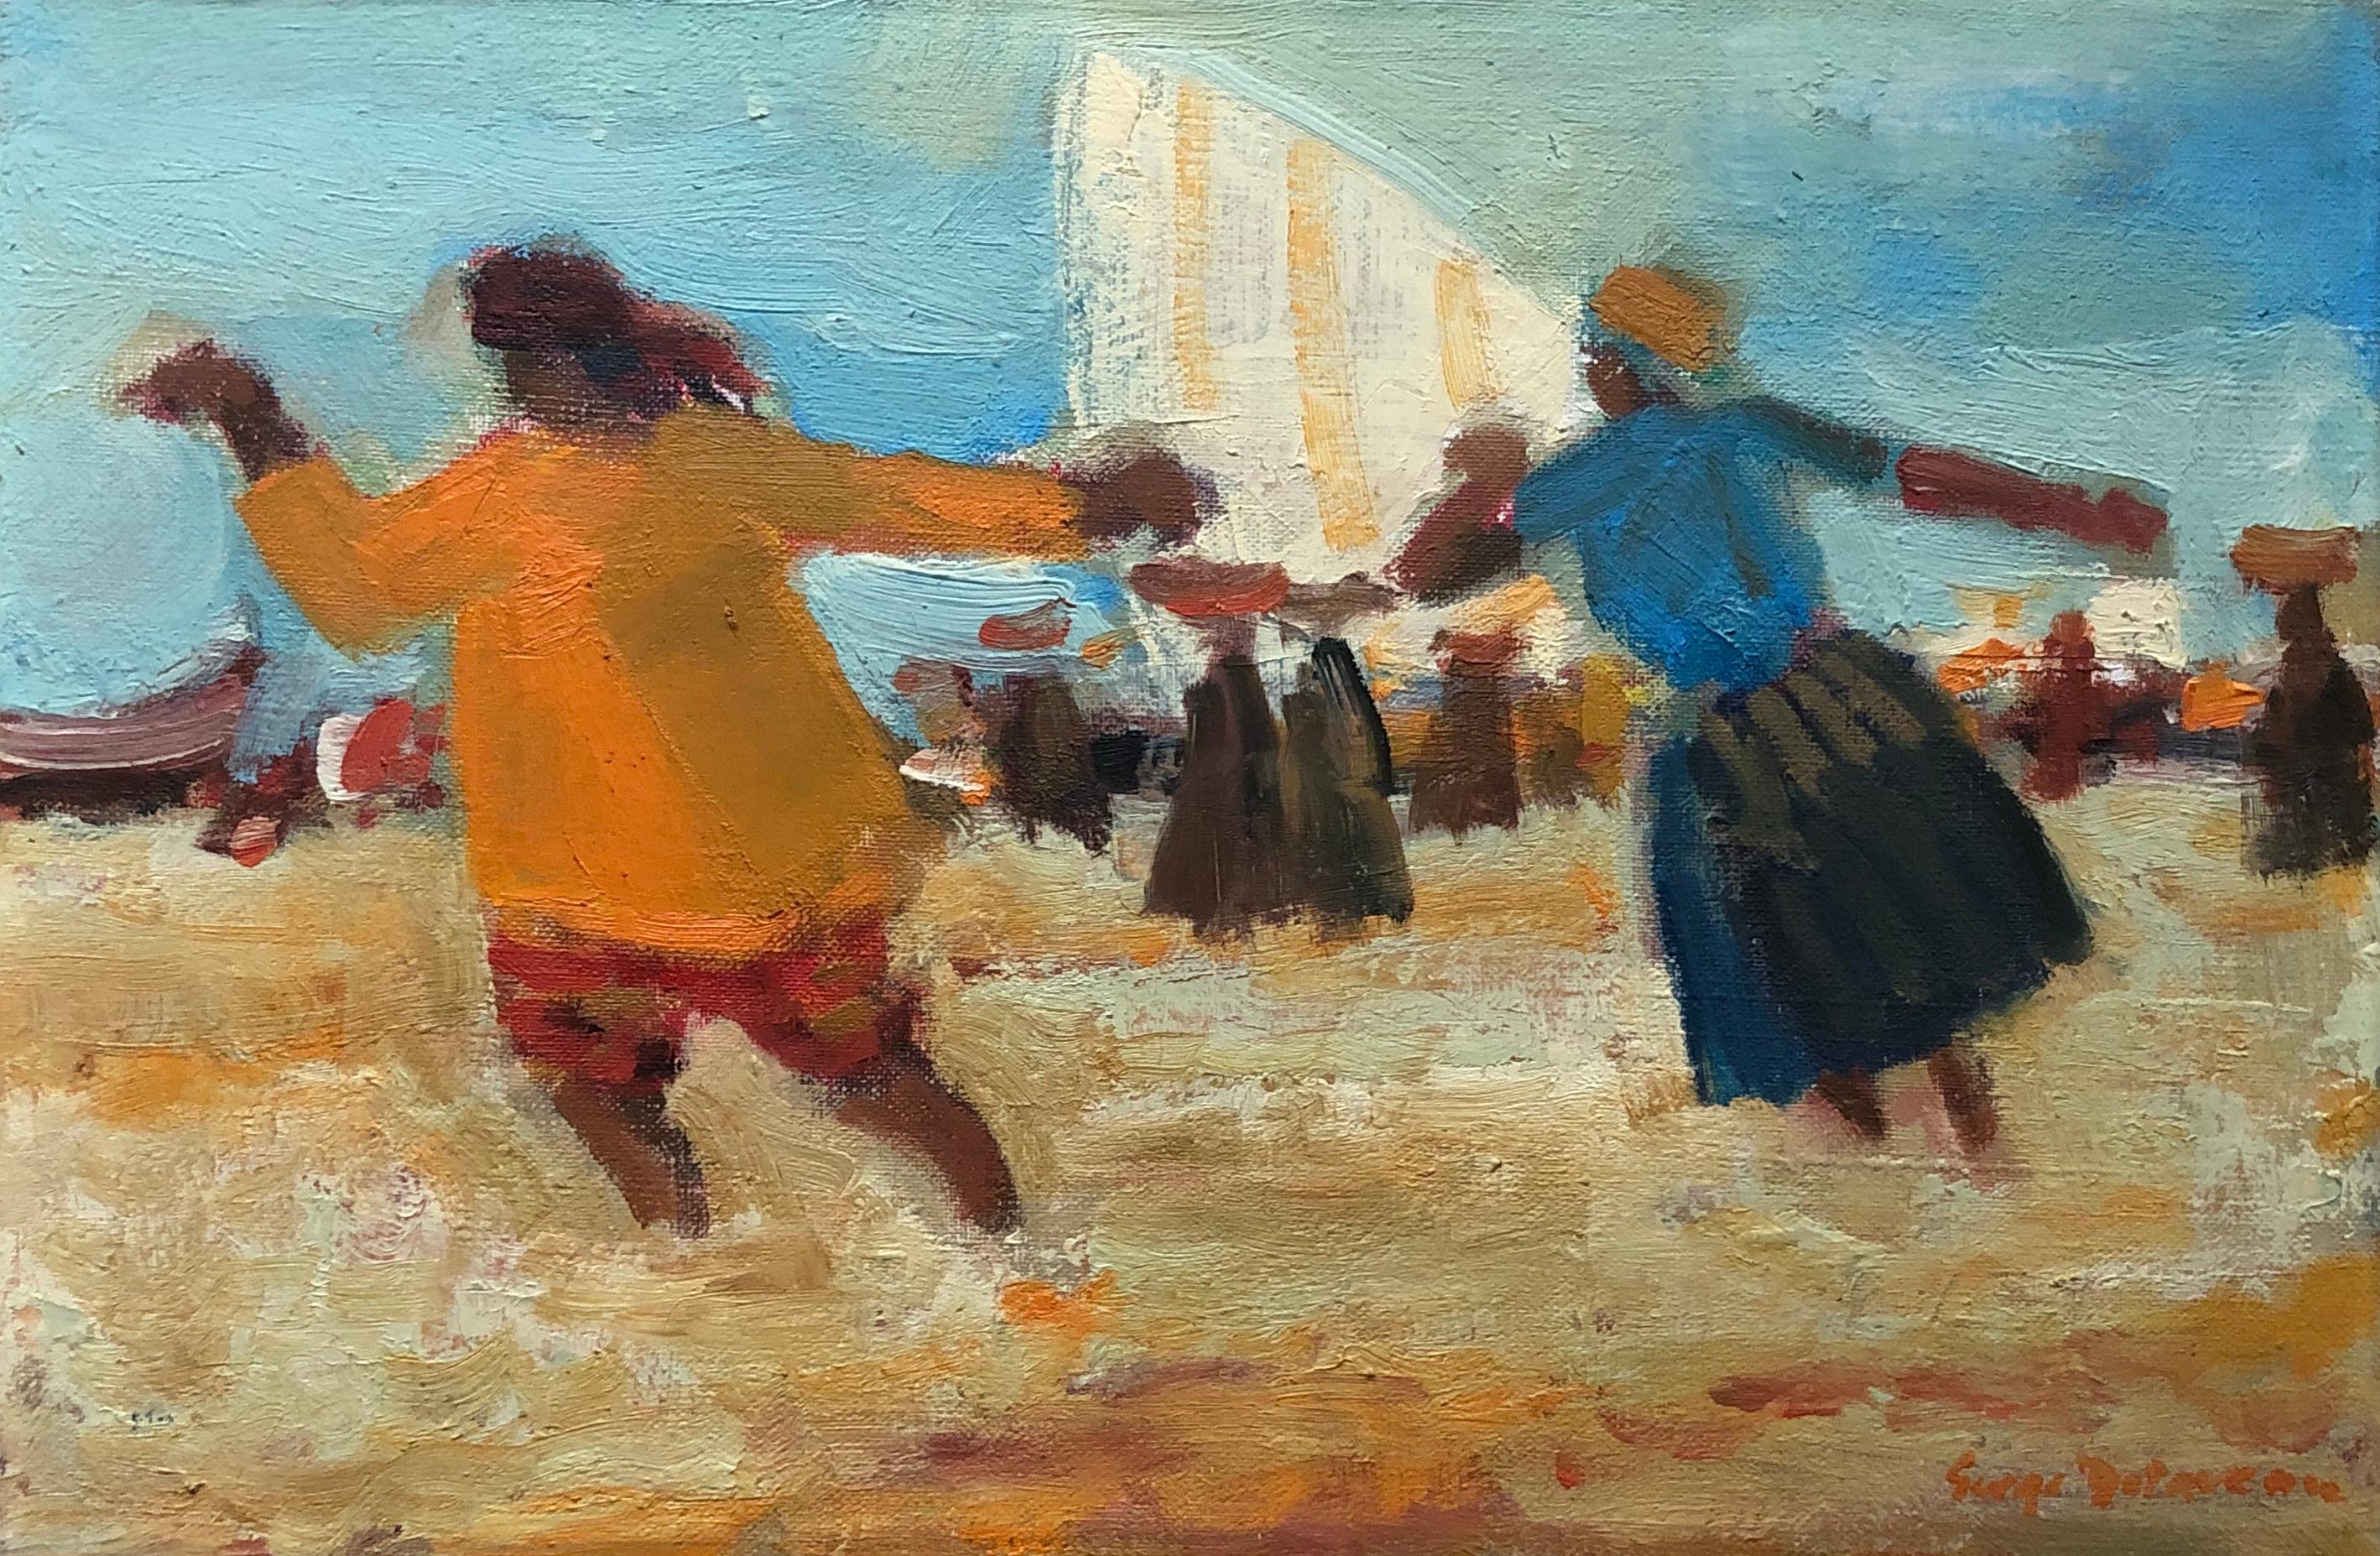 Serge DELAVEAU (1911-1999)
Lively beach.
Oil on canvas signed lower right.
Good condition.
27 x 41 cm